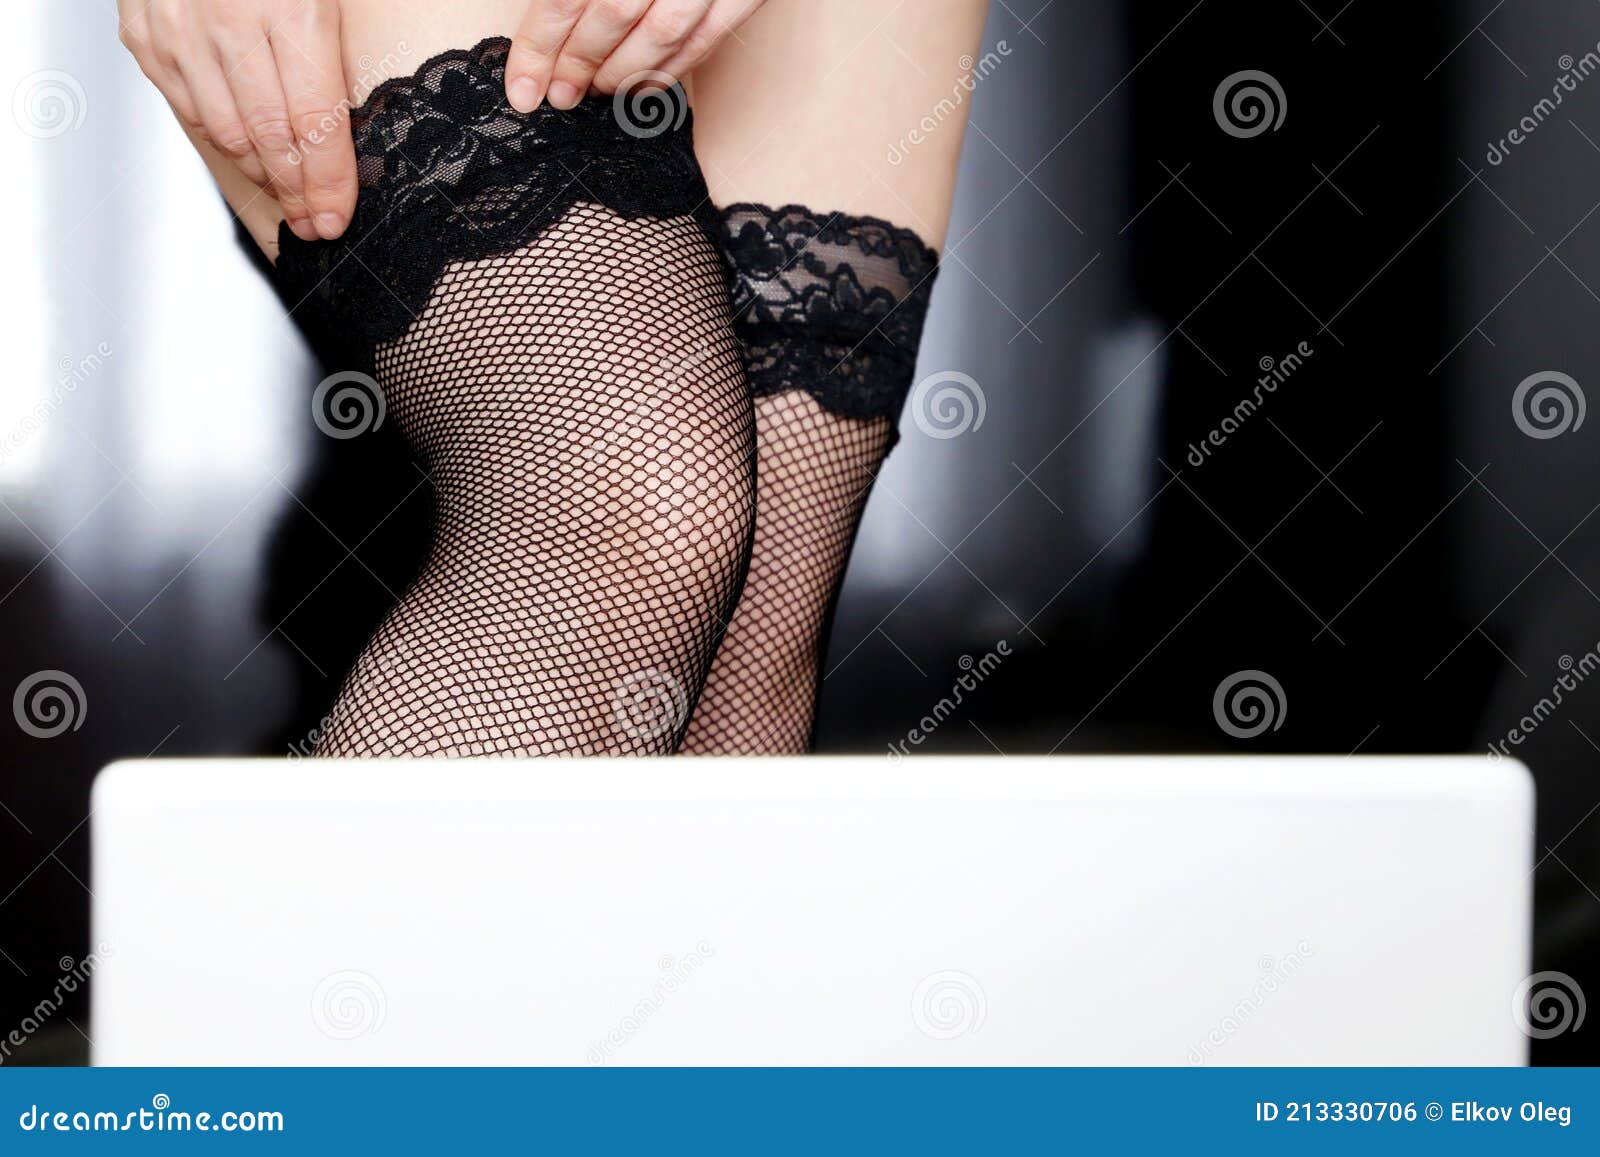 Hot Woman in Black Fishnet Stockings Posing in Front of Laptop Webcam Stock Photo